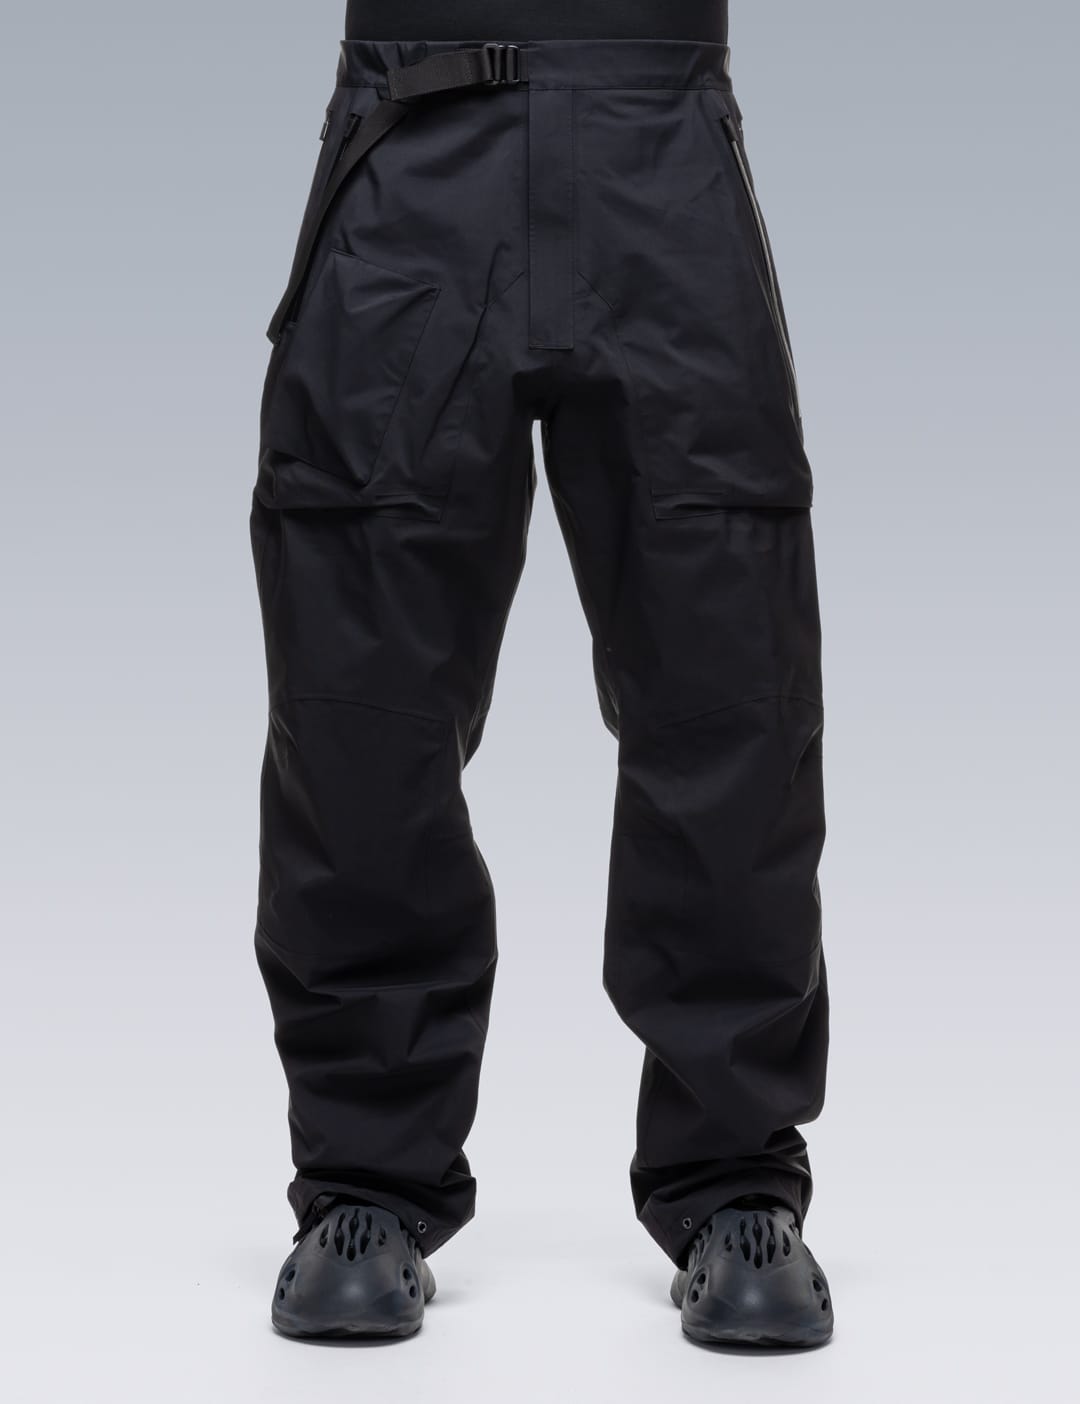 ACRONYM - 3L Gore-Tex Pro Pants | HBX - Globally Curated